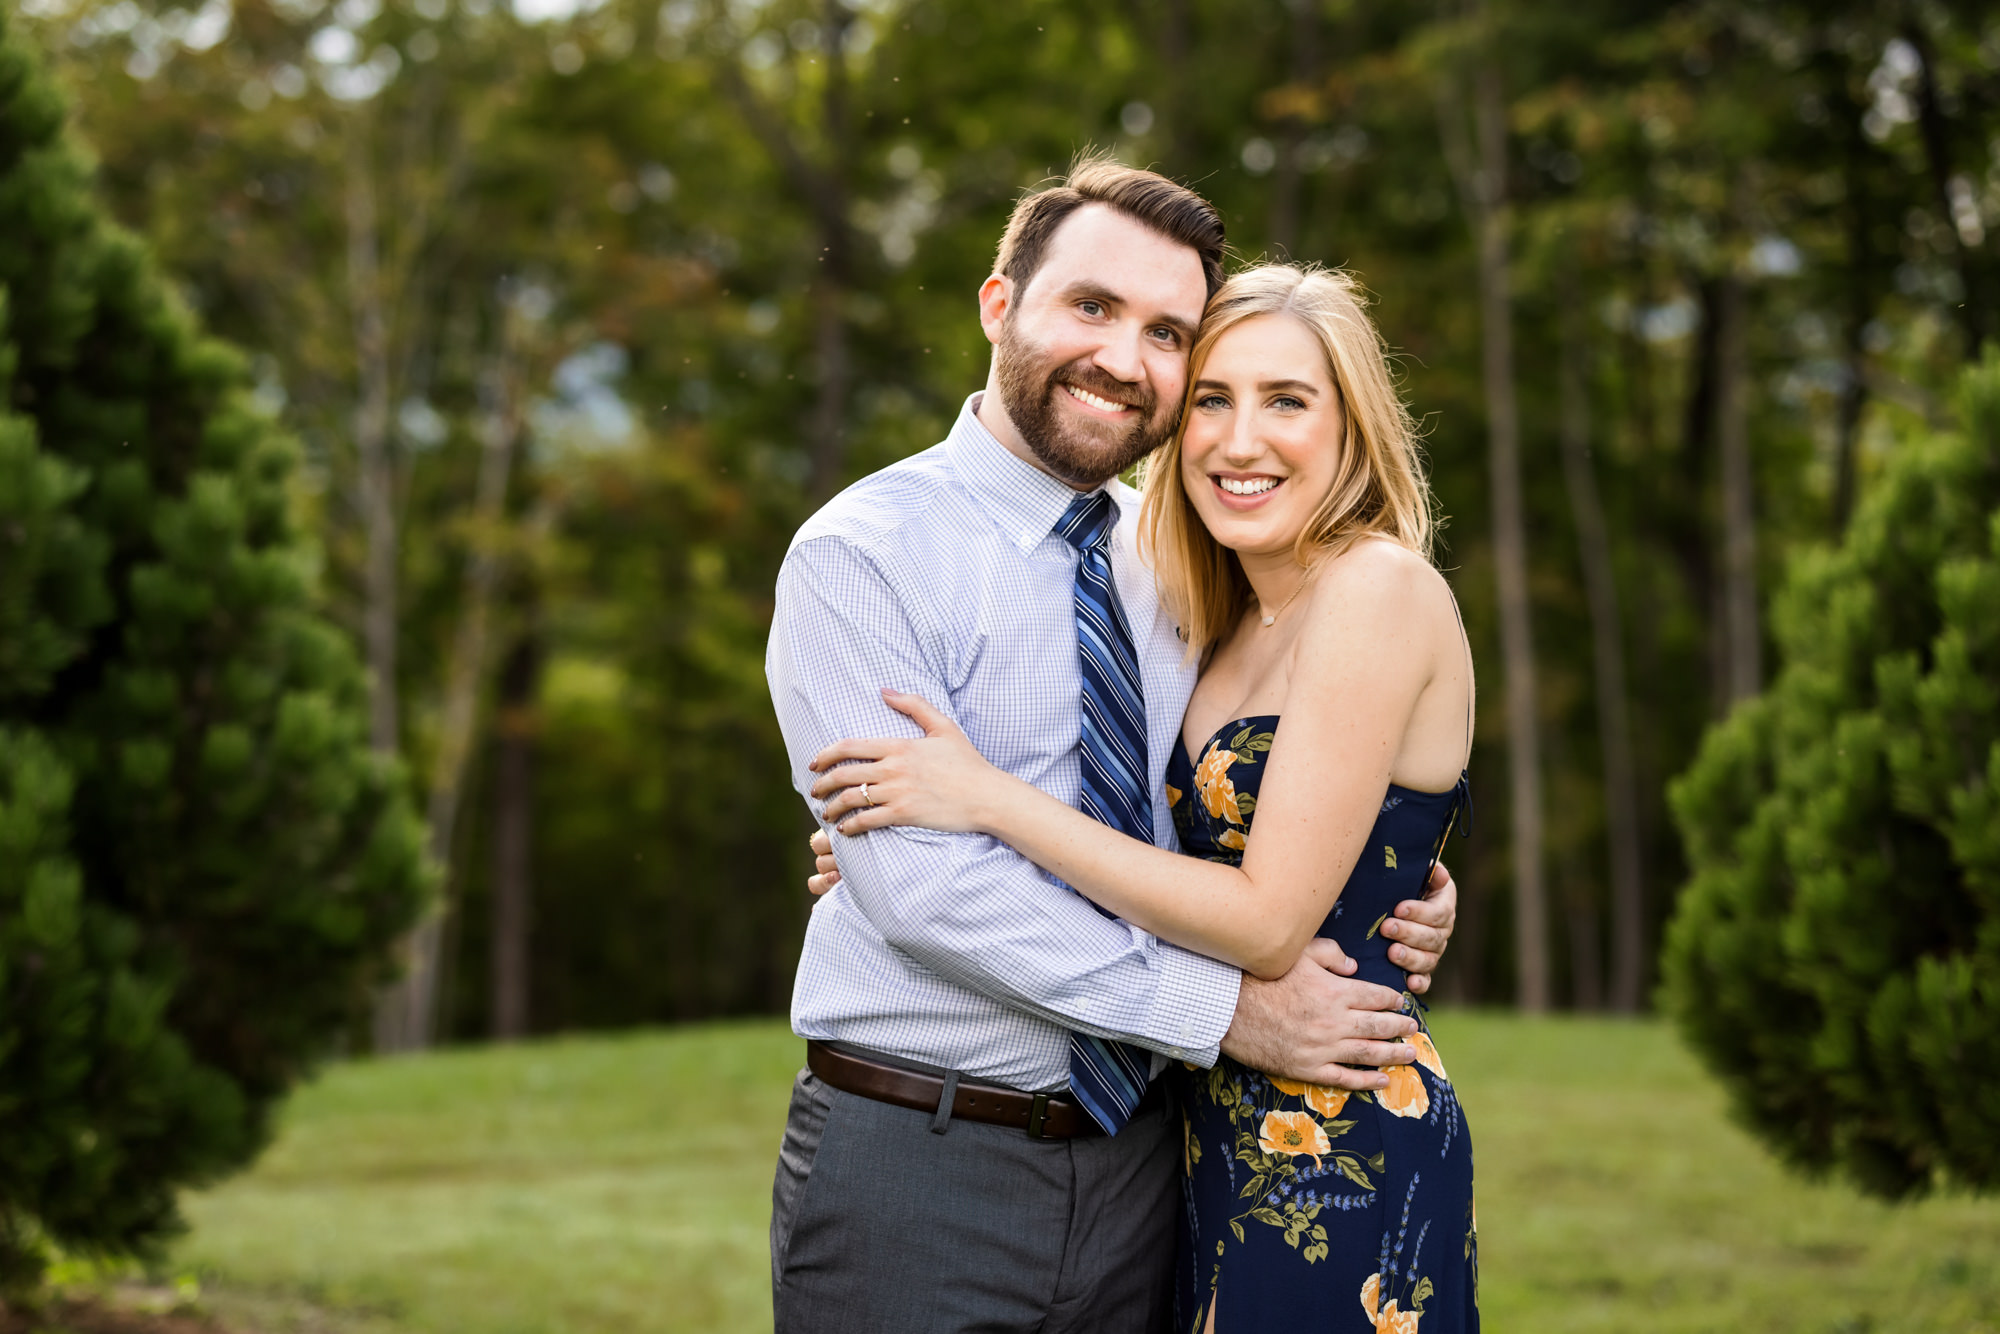 woman wearing navy floral dress and man wearing button down and tie during outdoor engagement session